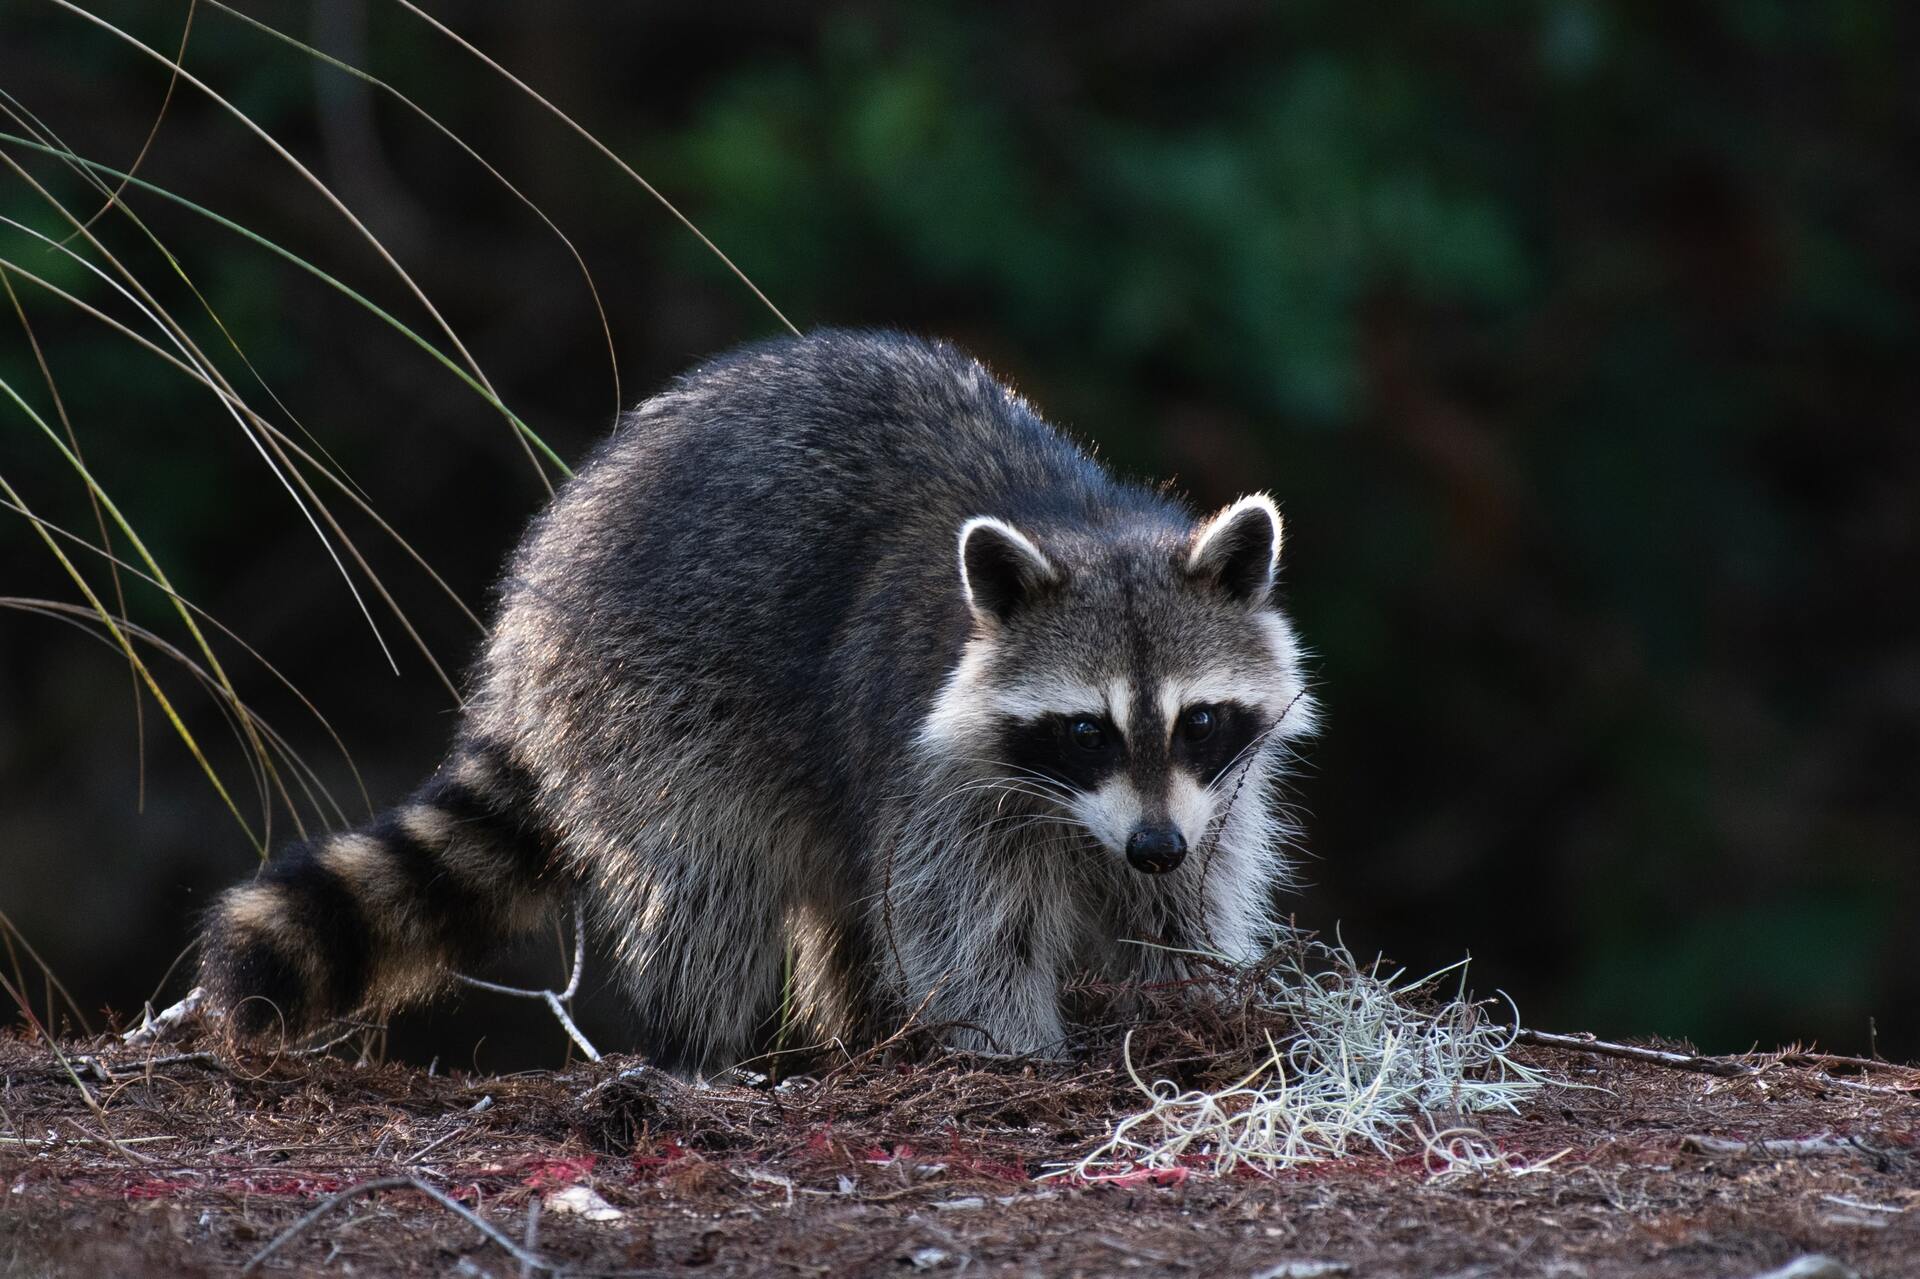 Father and daughter arrested in Florida for burning a raccoon alive